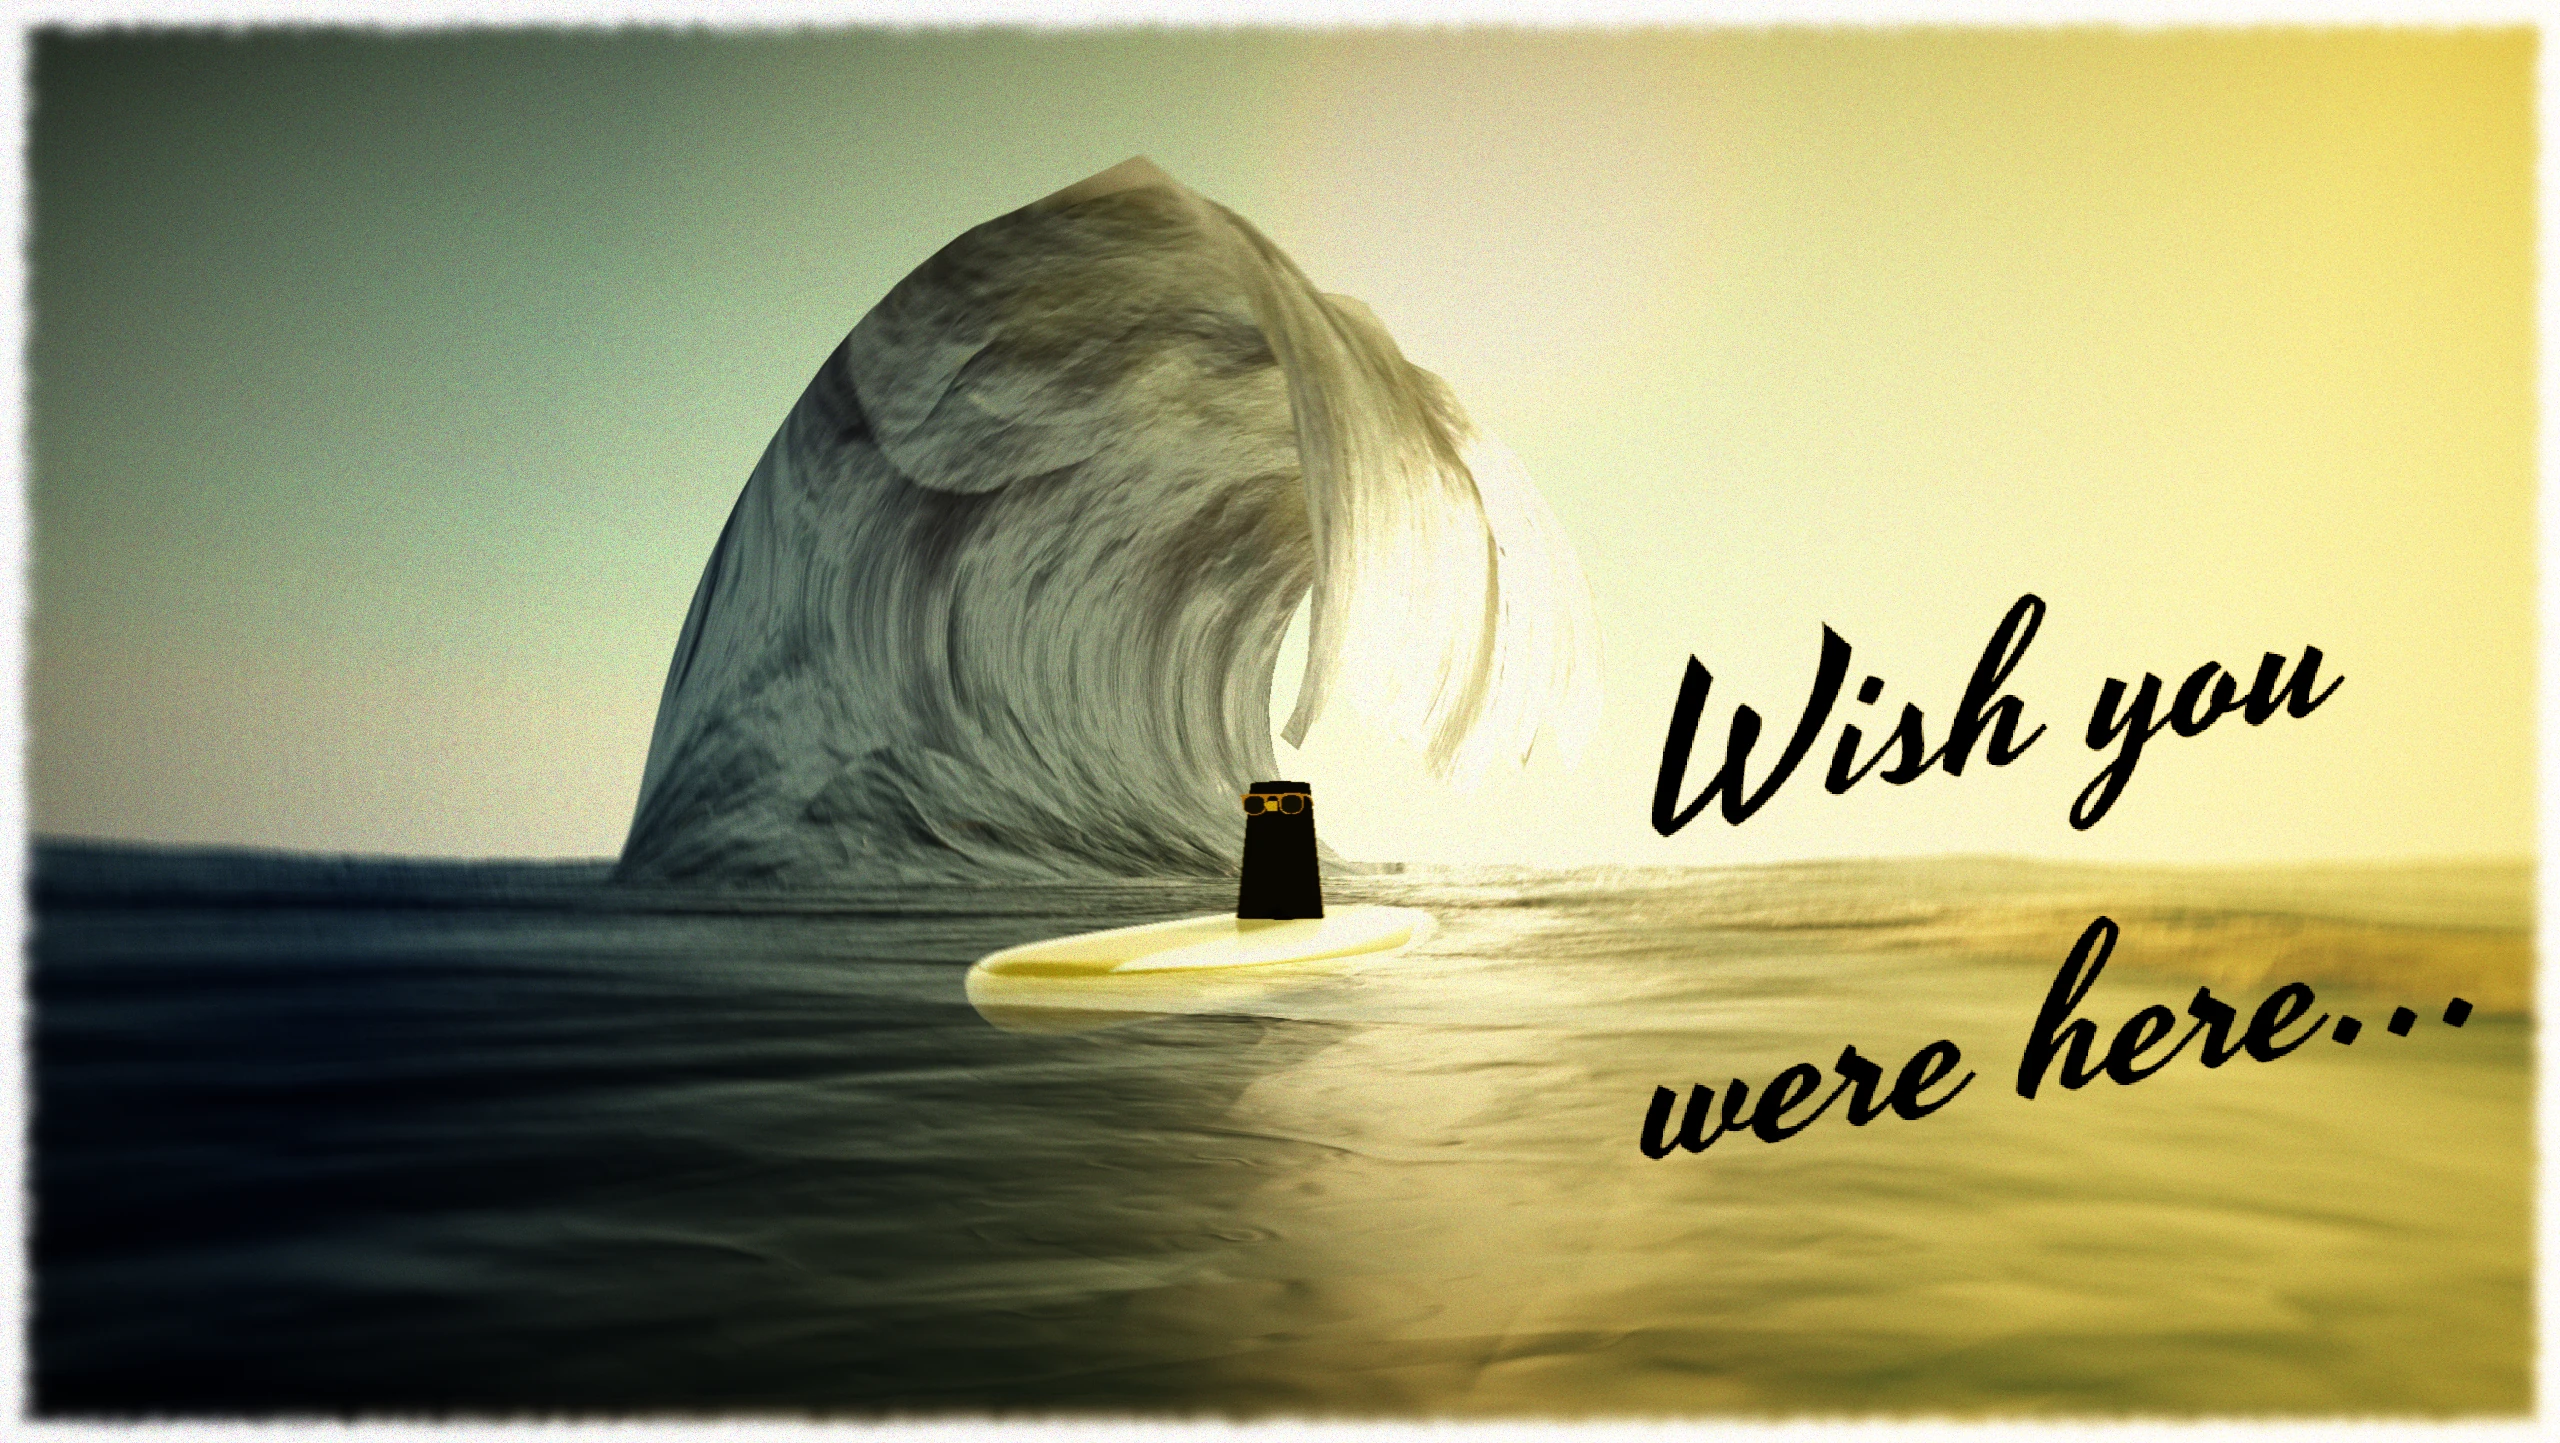 An image representing the penguin game with a penguin surfing
                                next to a big wave with the text 'Wish you were here.'